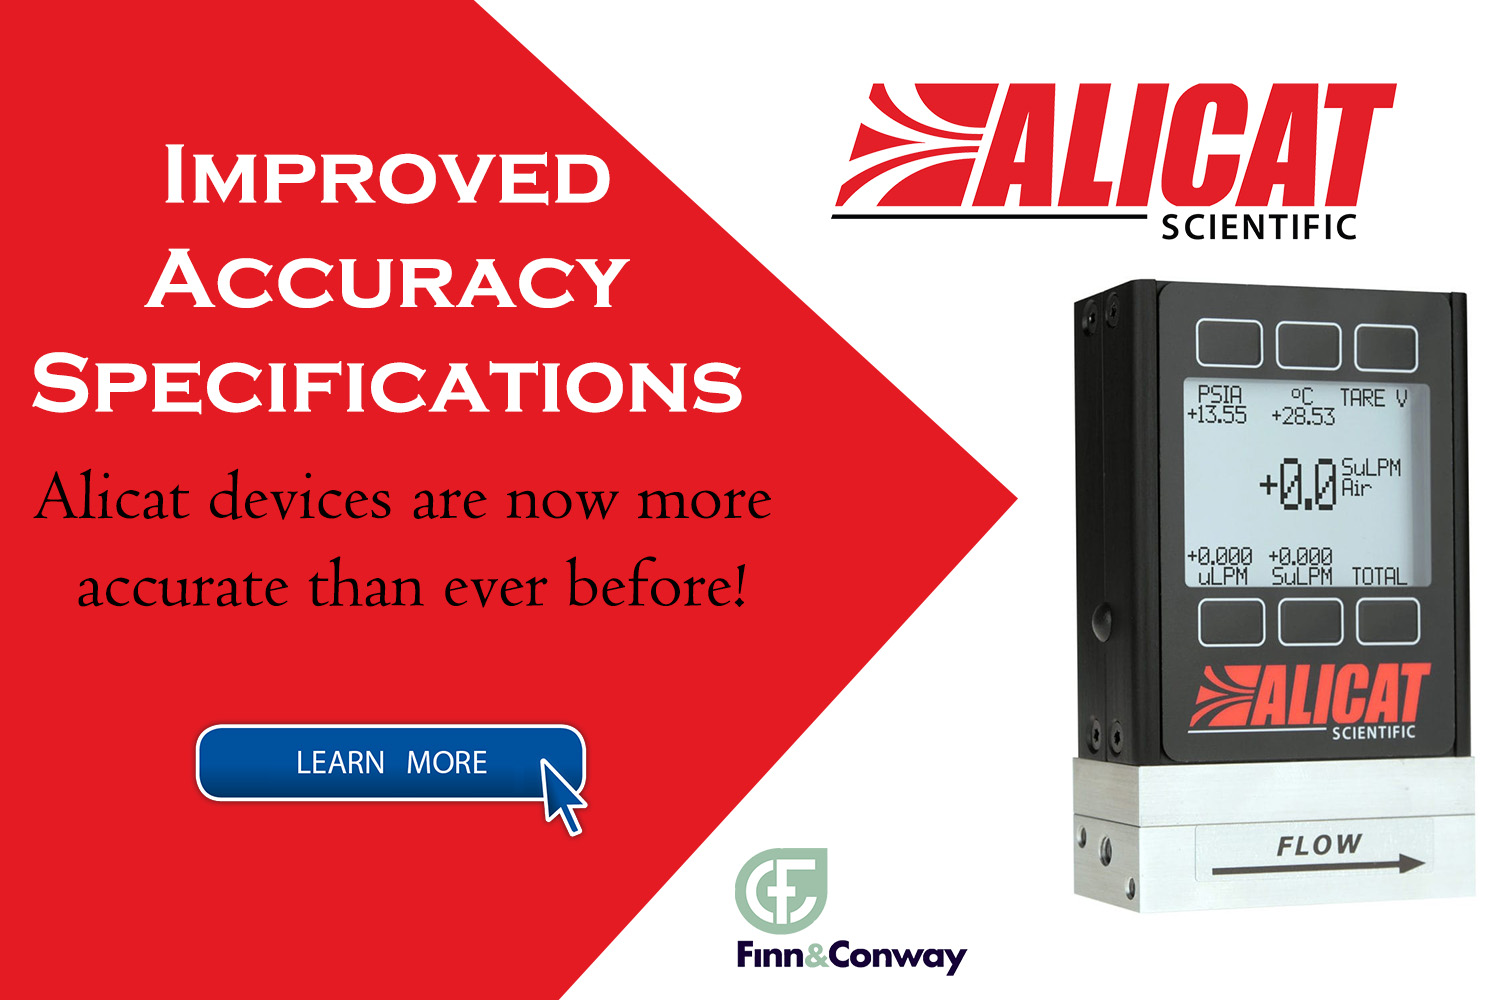 Improved Accuracy Specifications by Alicat